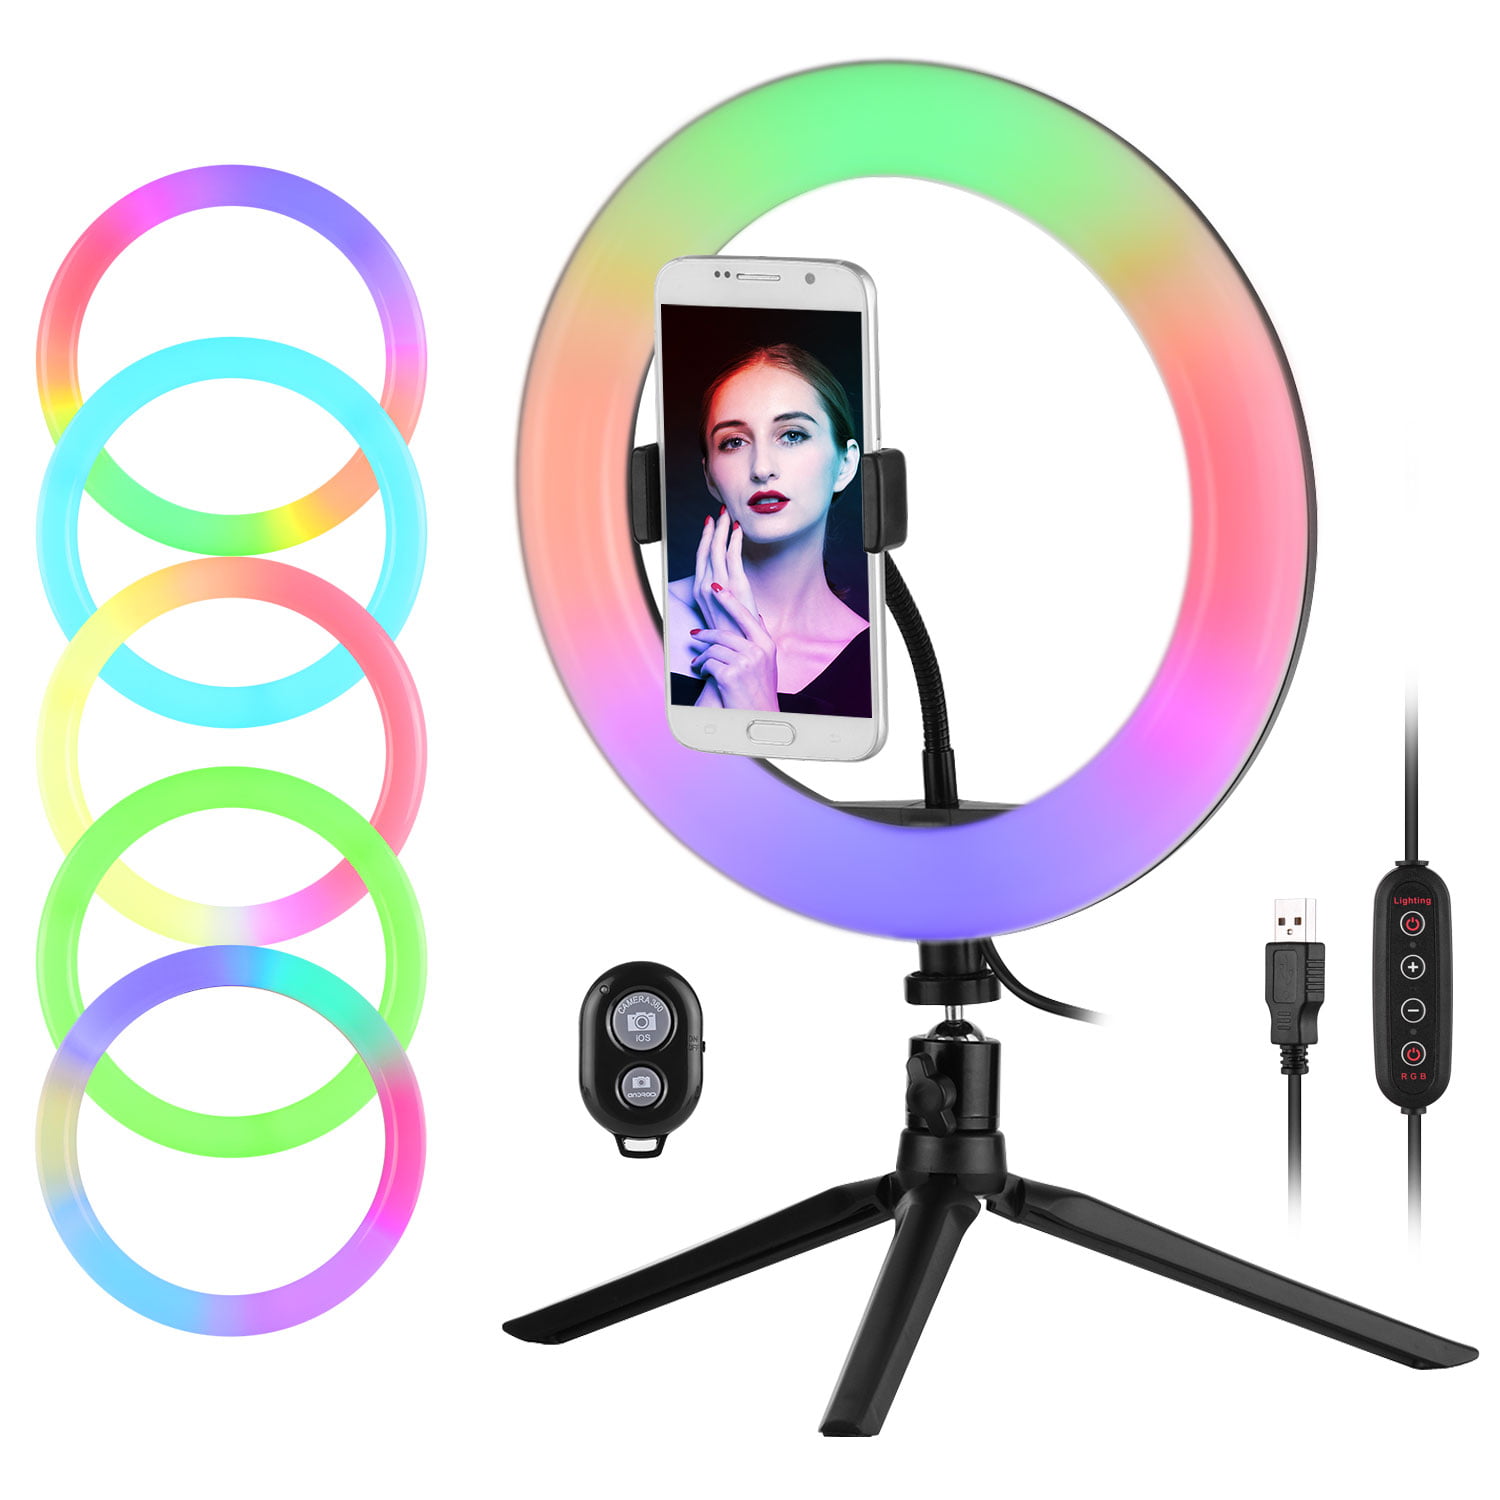 20 Inch Ring Lights Star Ring Light with Remote Controller and 3 Phone Holder 3000K-5500K LED RGB Fill Light for Portrait Video Makeup 